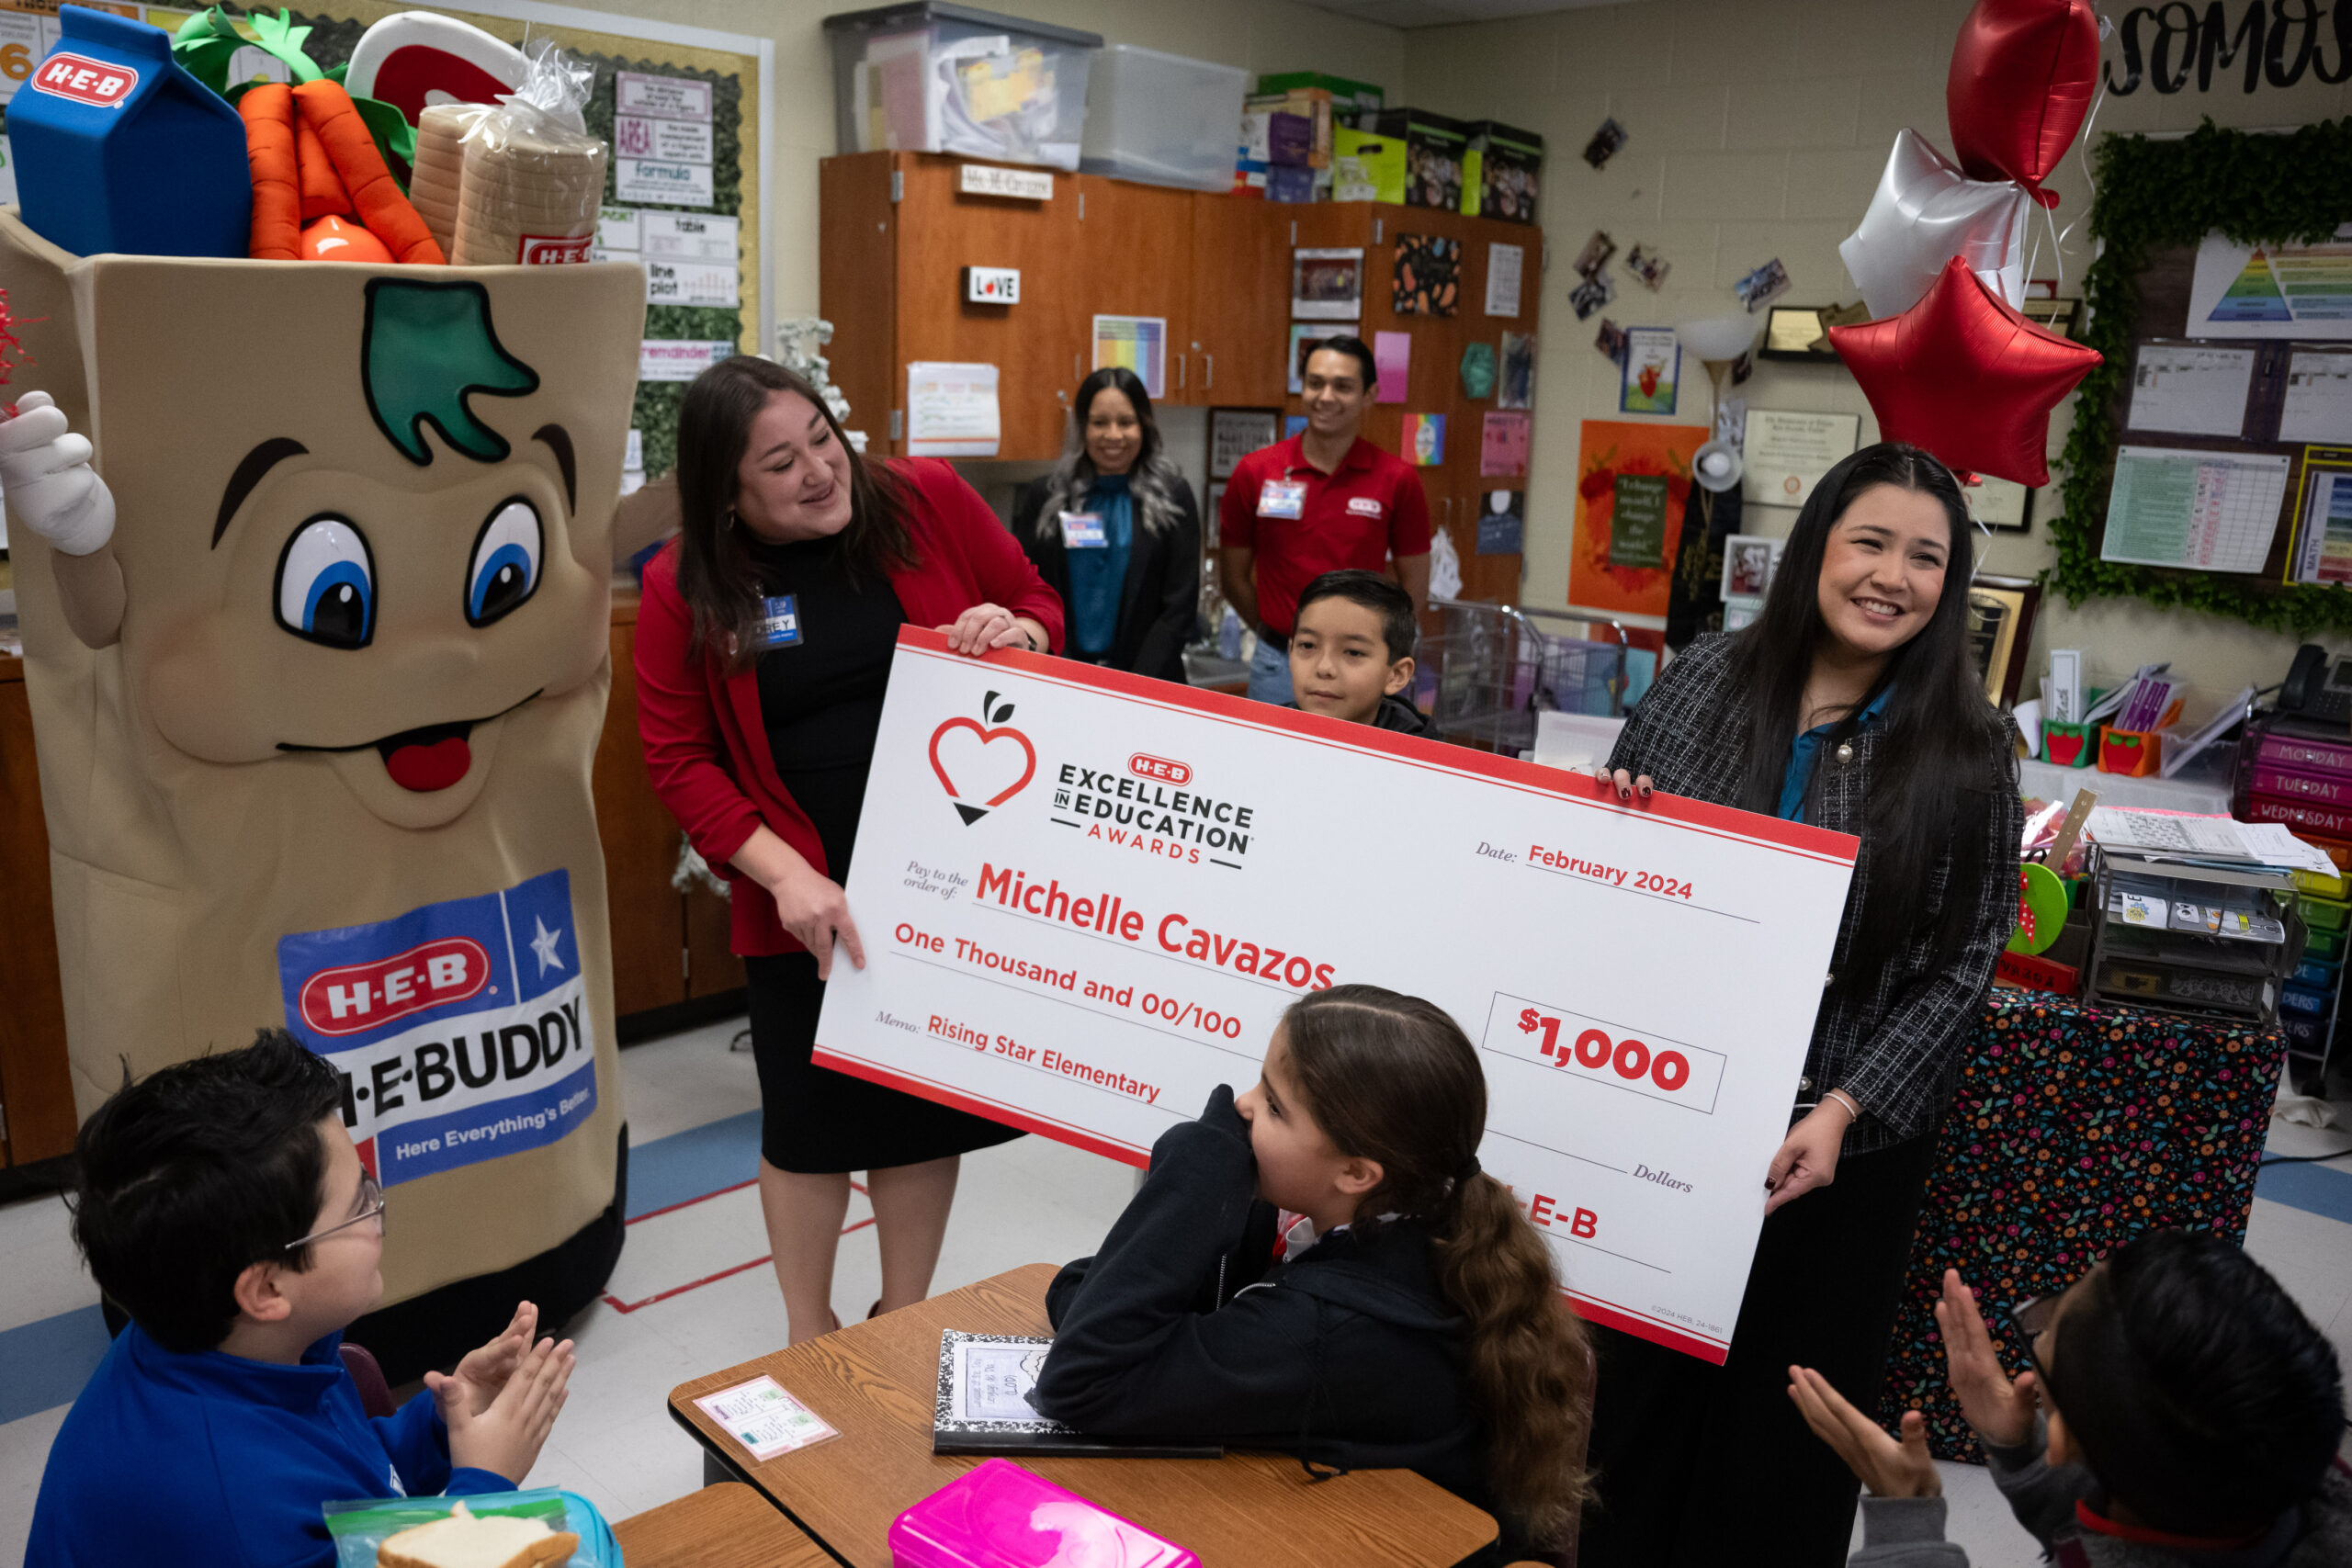 H-E-B Excellence in Education - South Texas Region